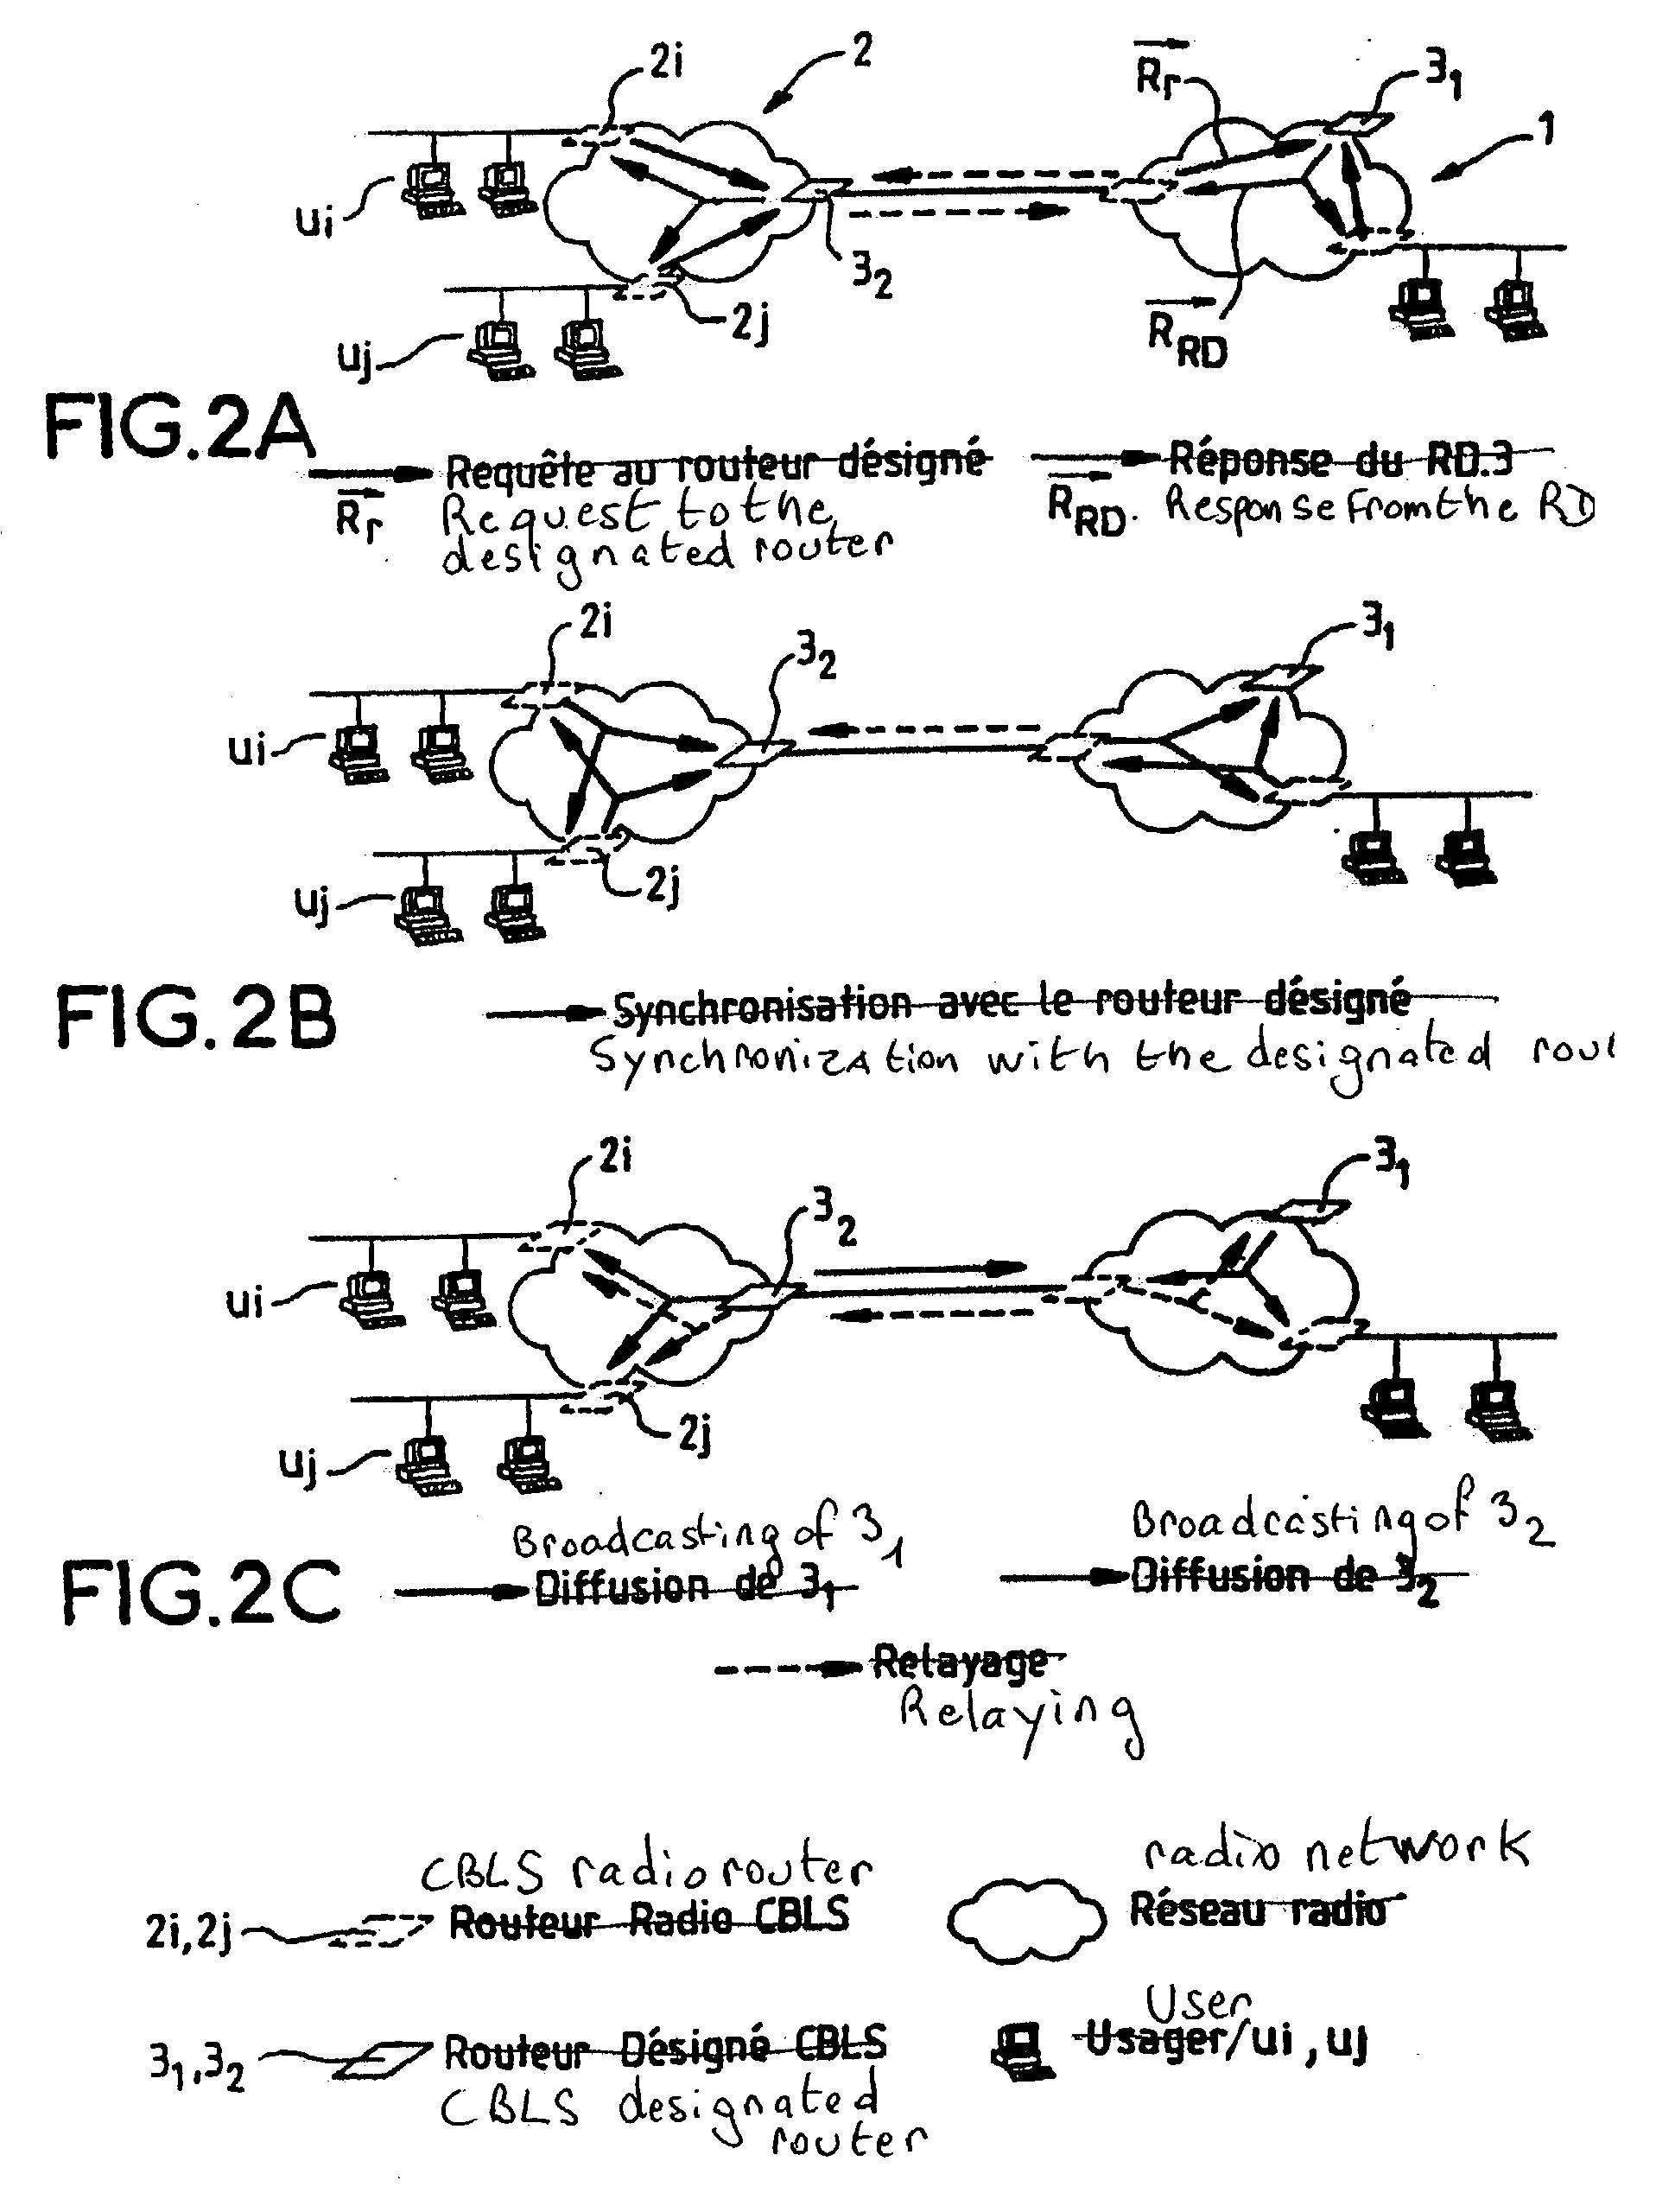 Method for adapting the OSPF routing protocol to radio networks